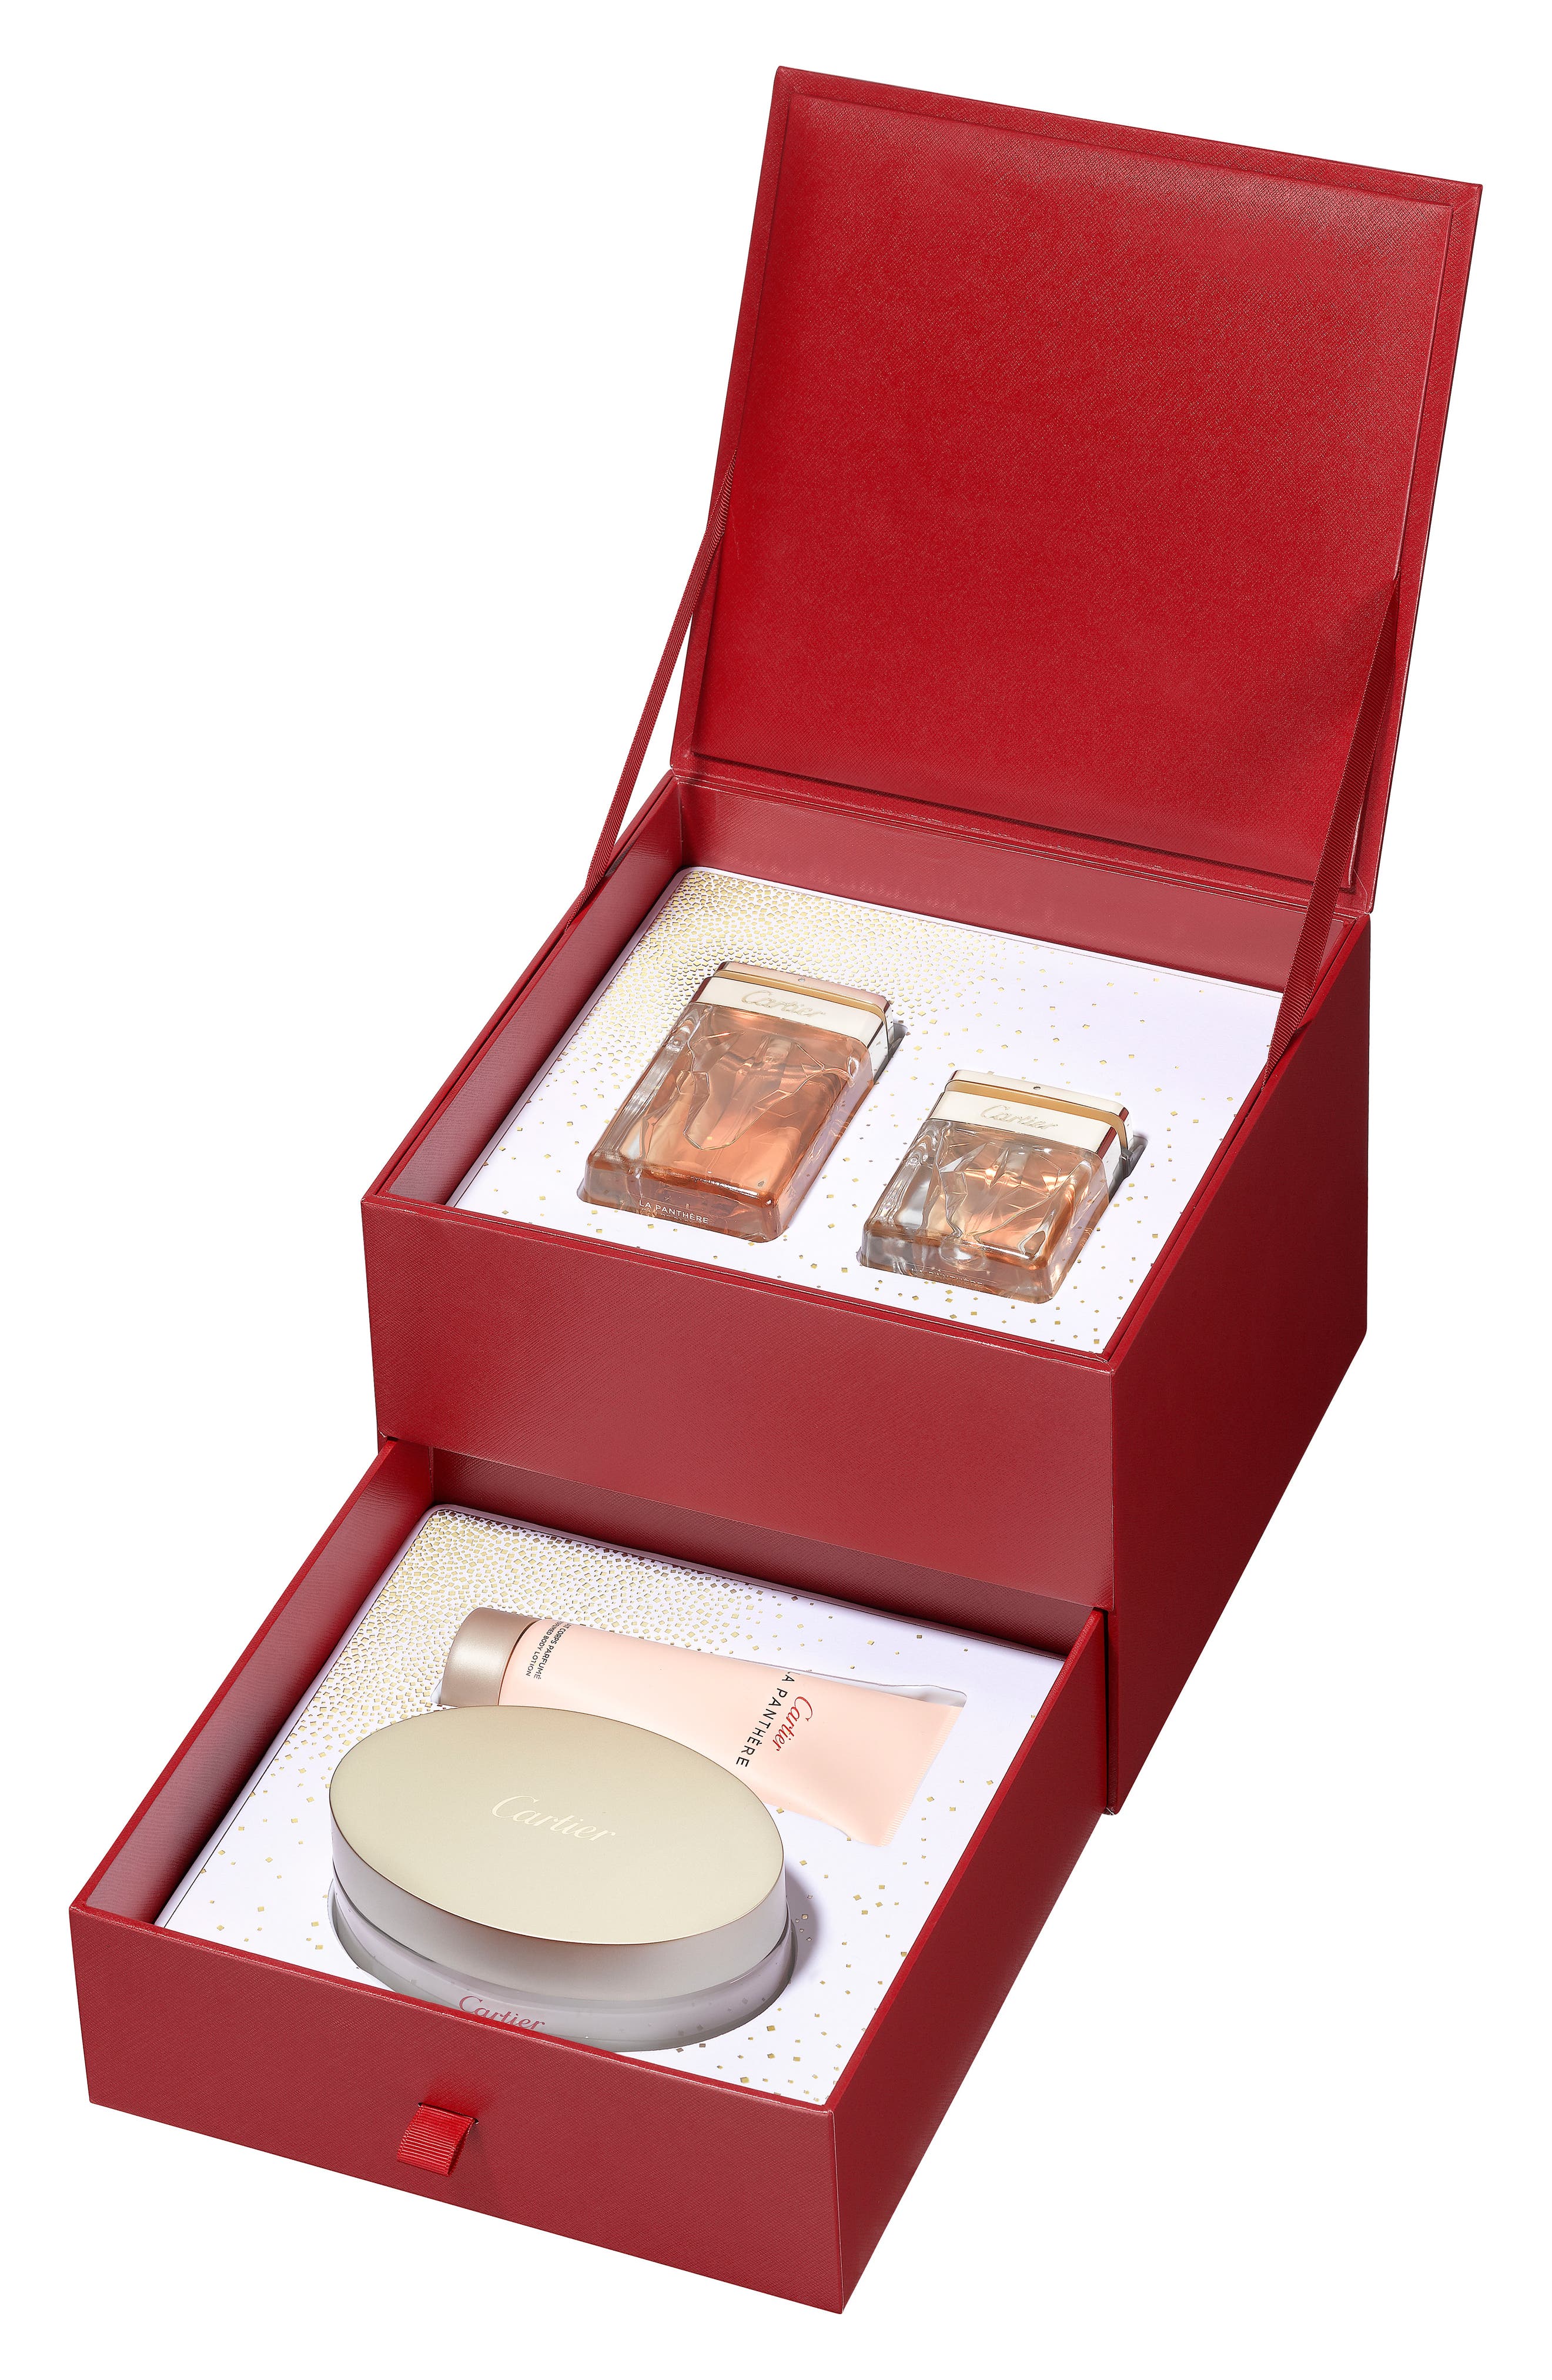 cartier panthere perfume gift set